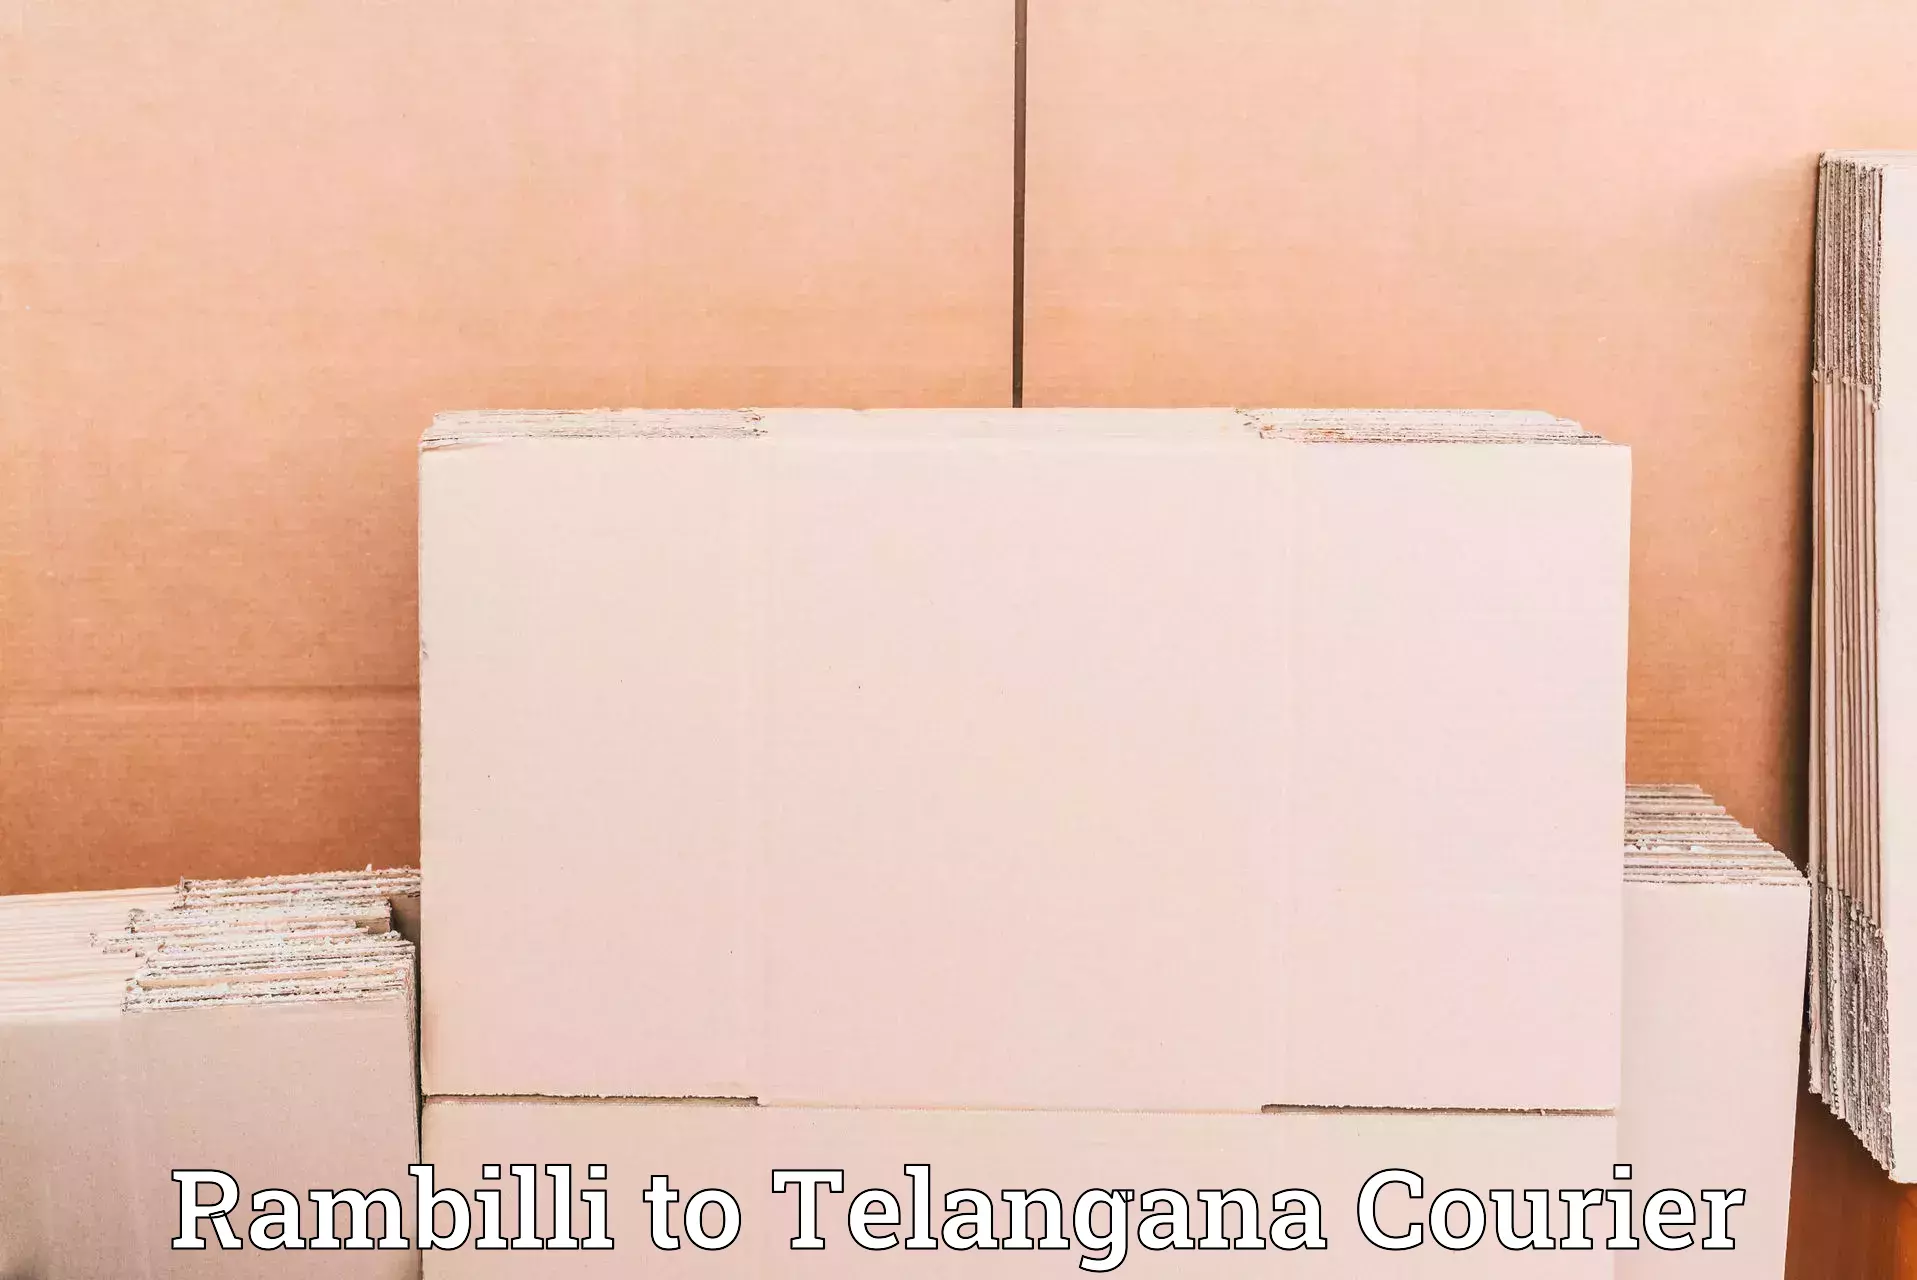 24-hour courier services in Rambilli to Jannaram